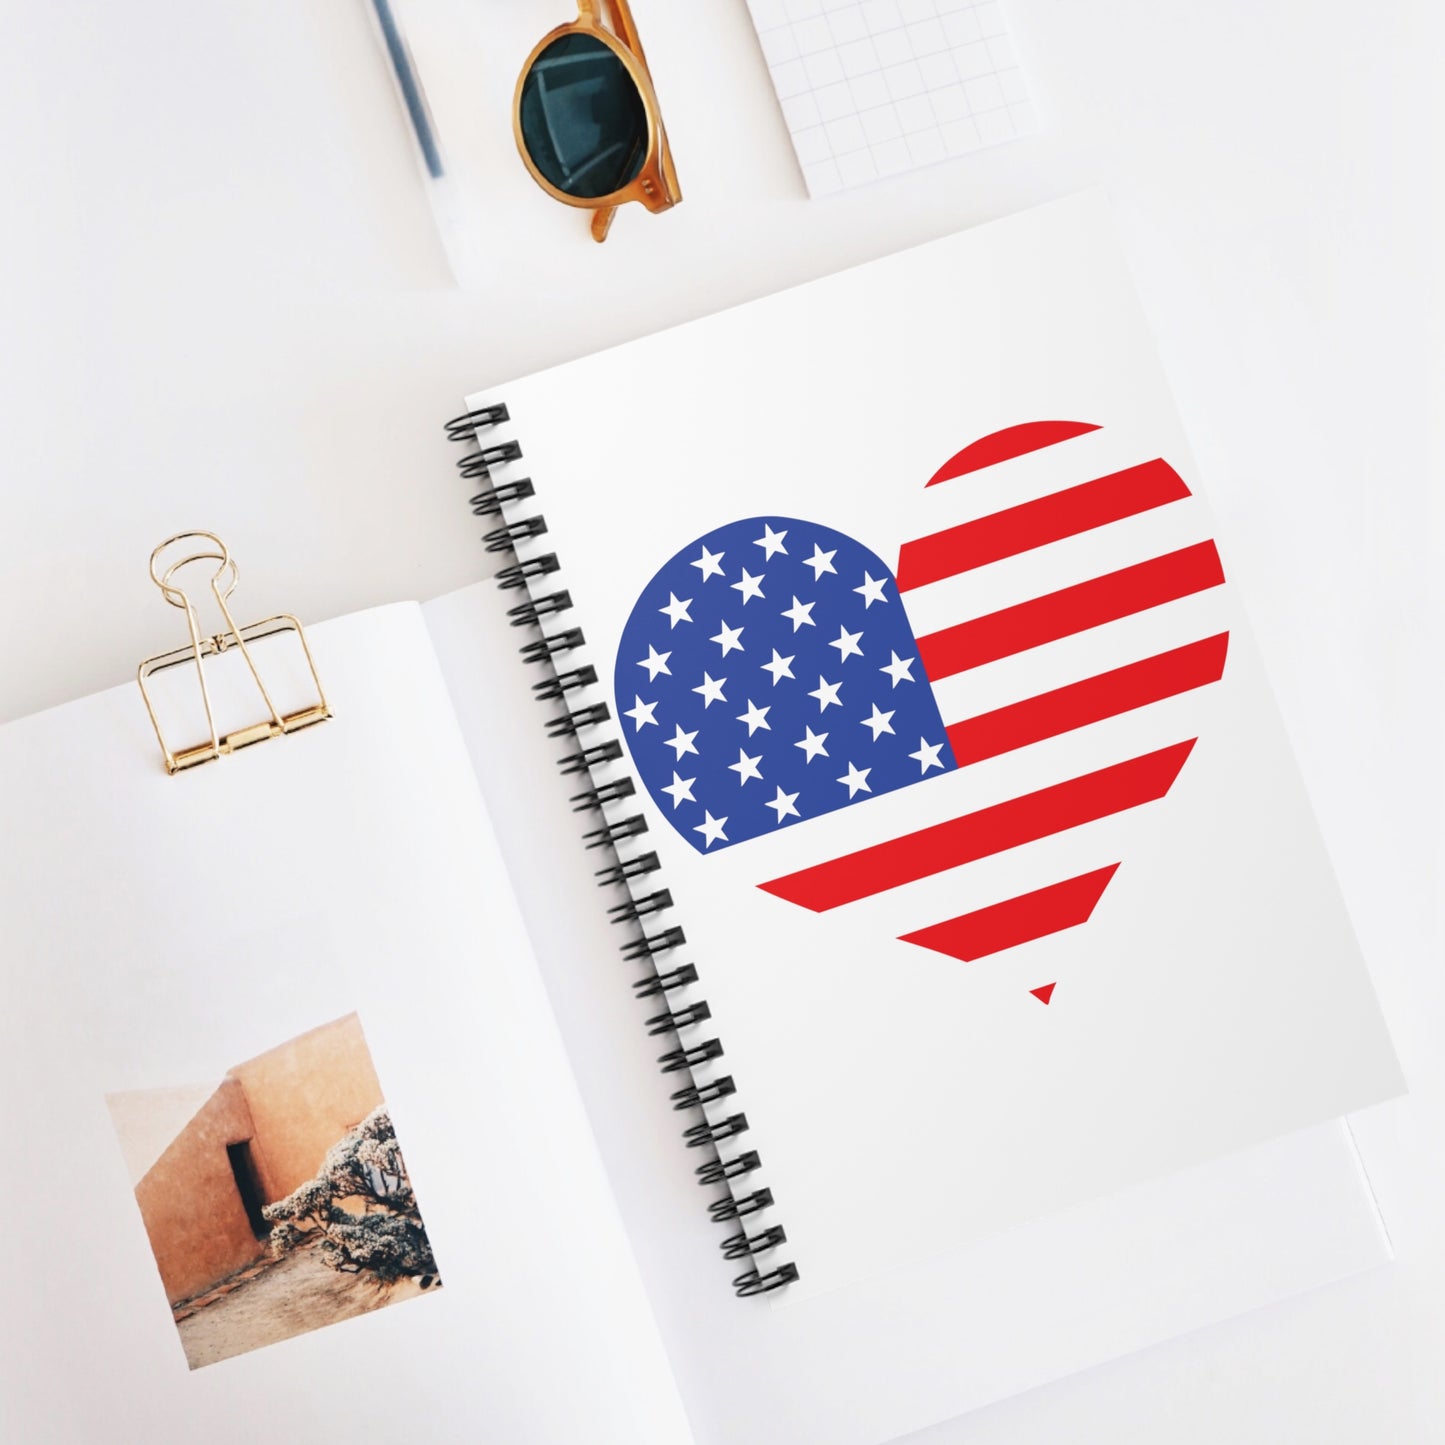 Flag Heart: Spiral Notebook - Log Books - Journals - Diaries - and More Custom Printed by TheGlassyLass